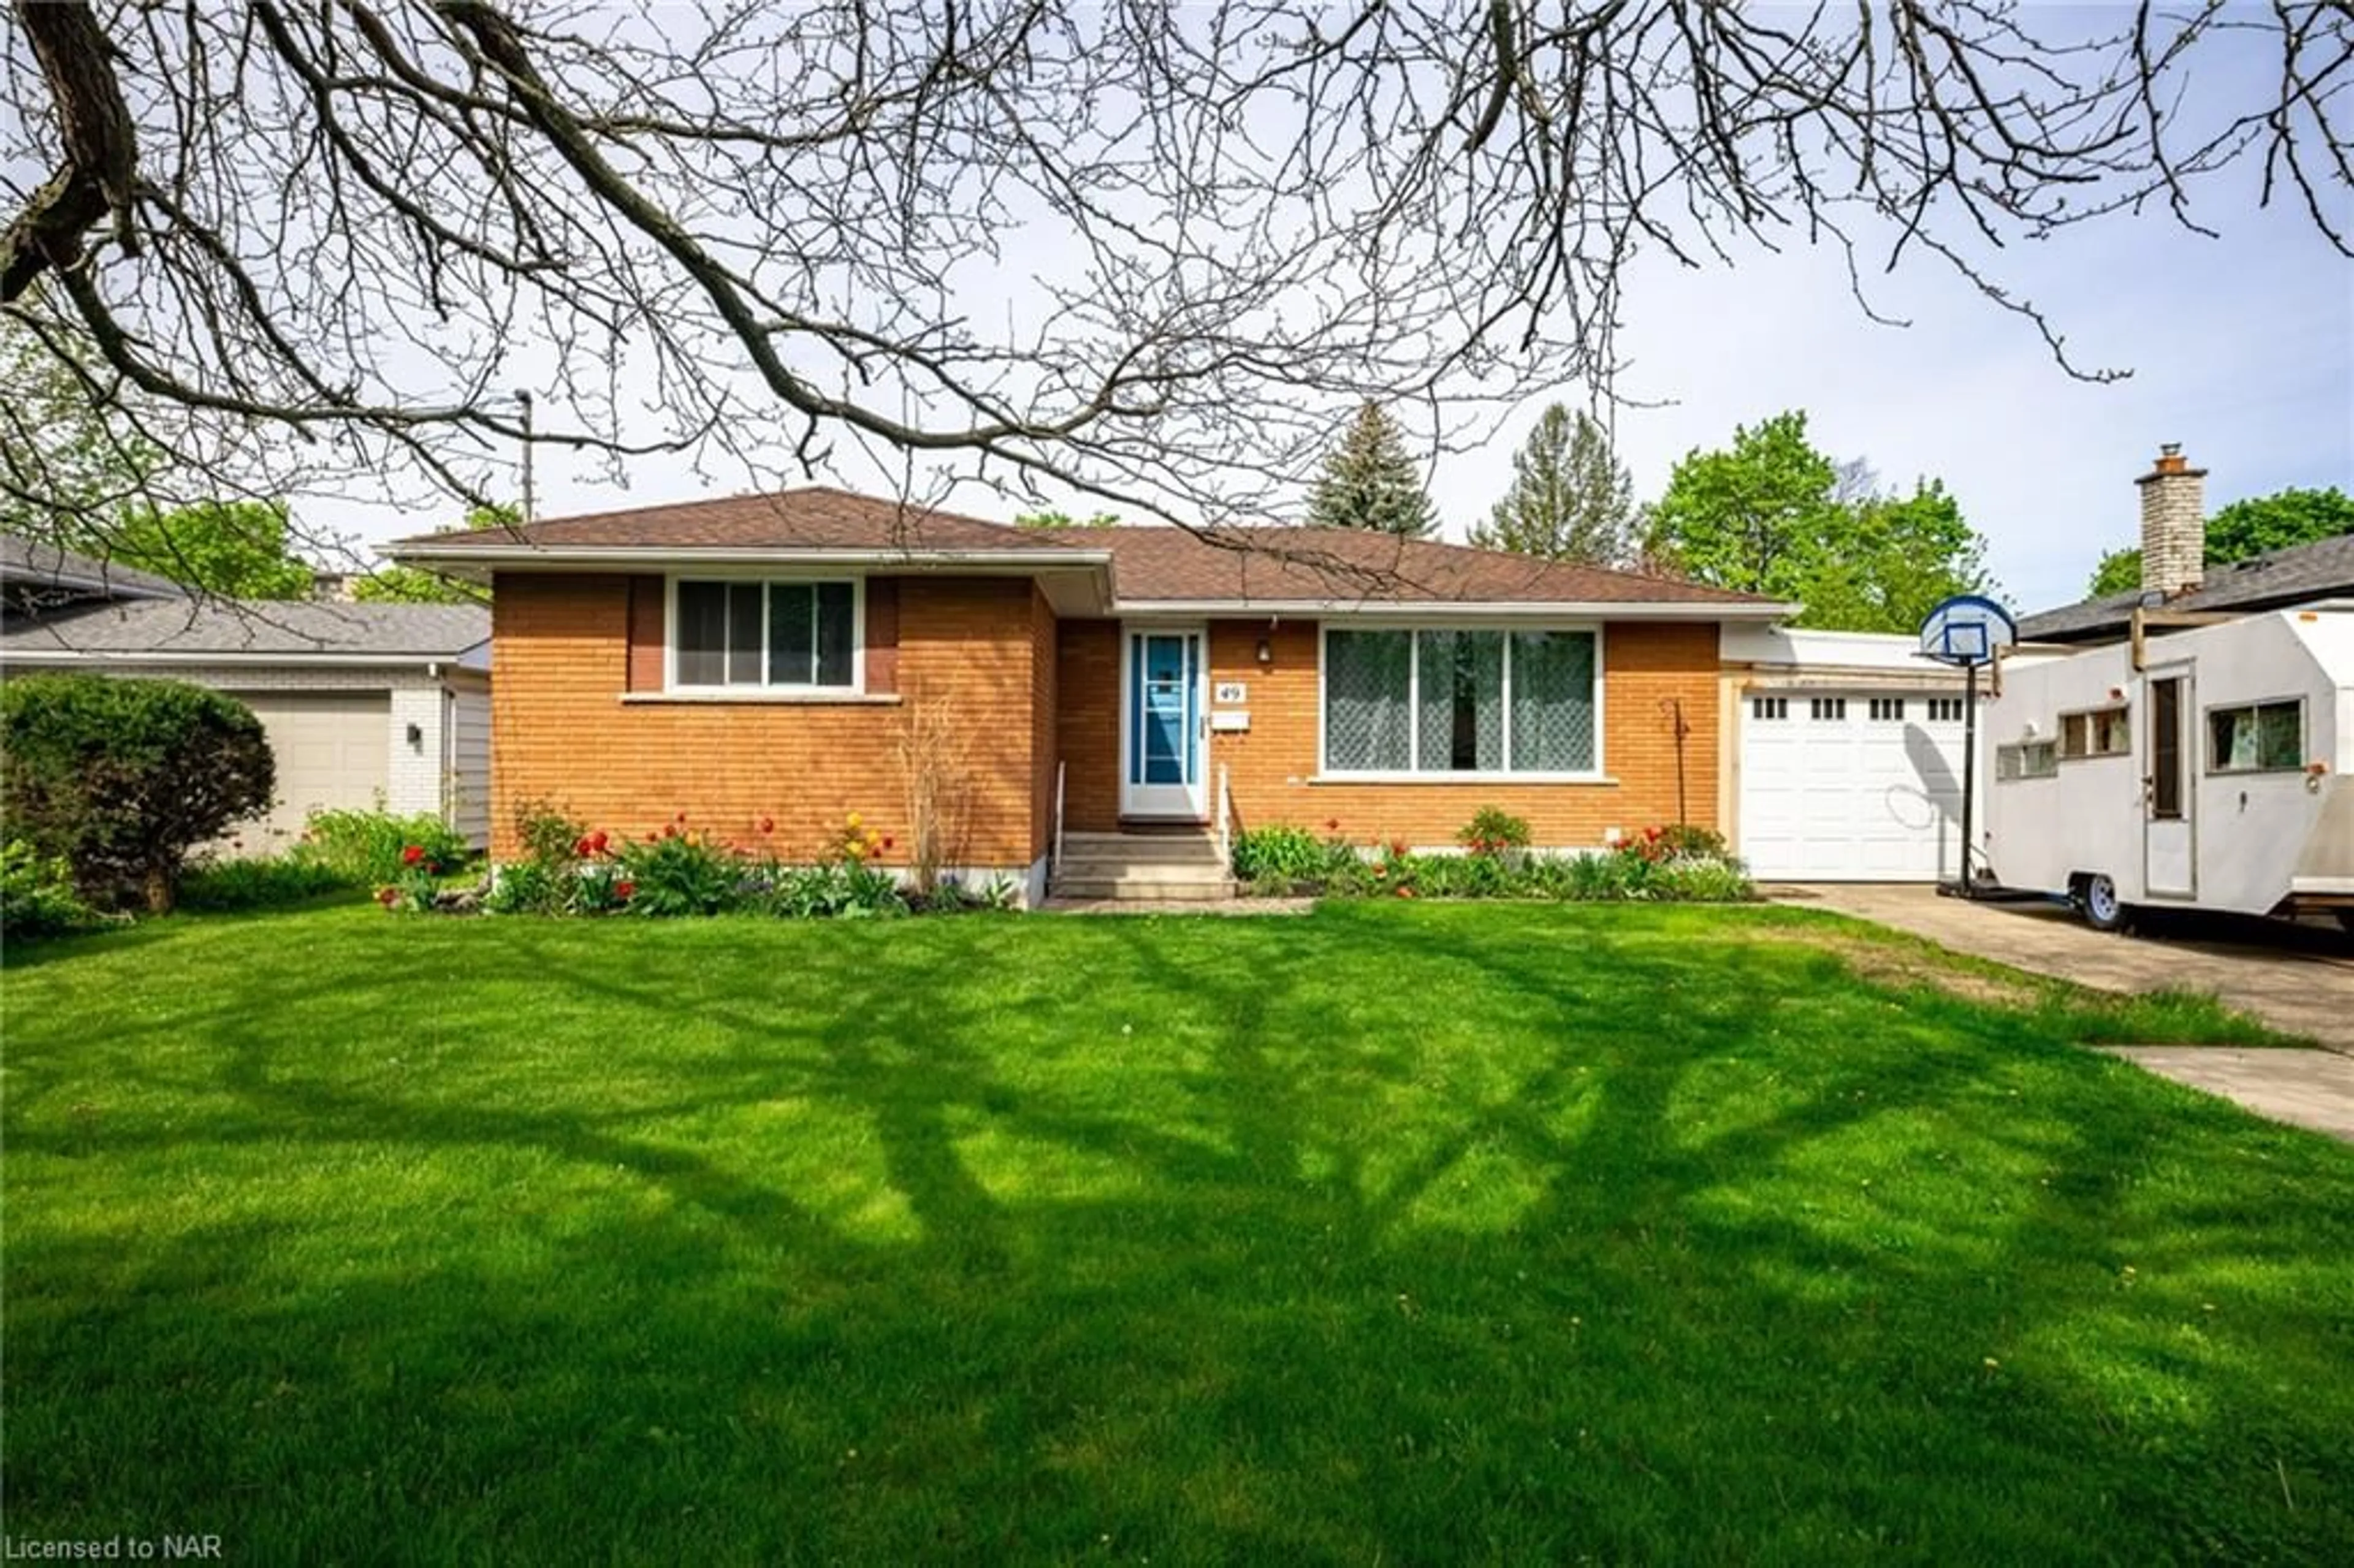 Home with brick exterior material for 49 Highcourt Cres, St. Catharines Ontario L2M 3M5